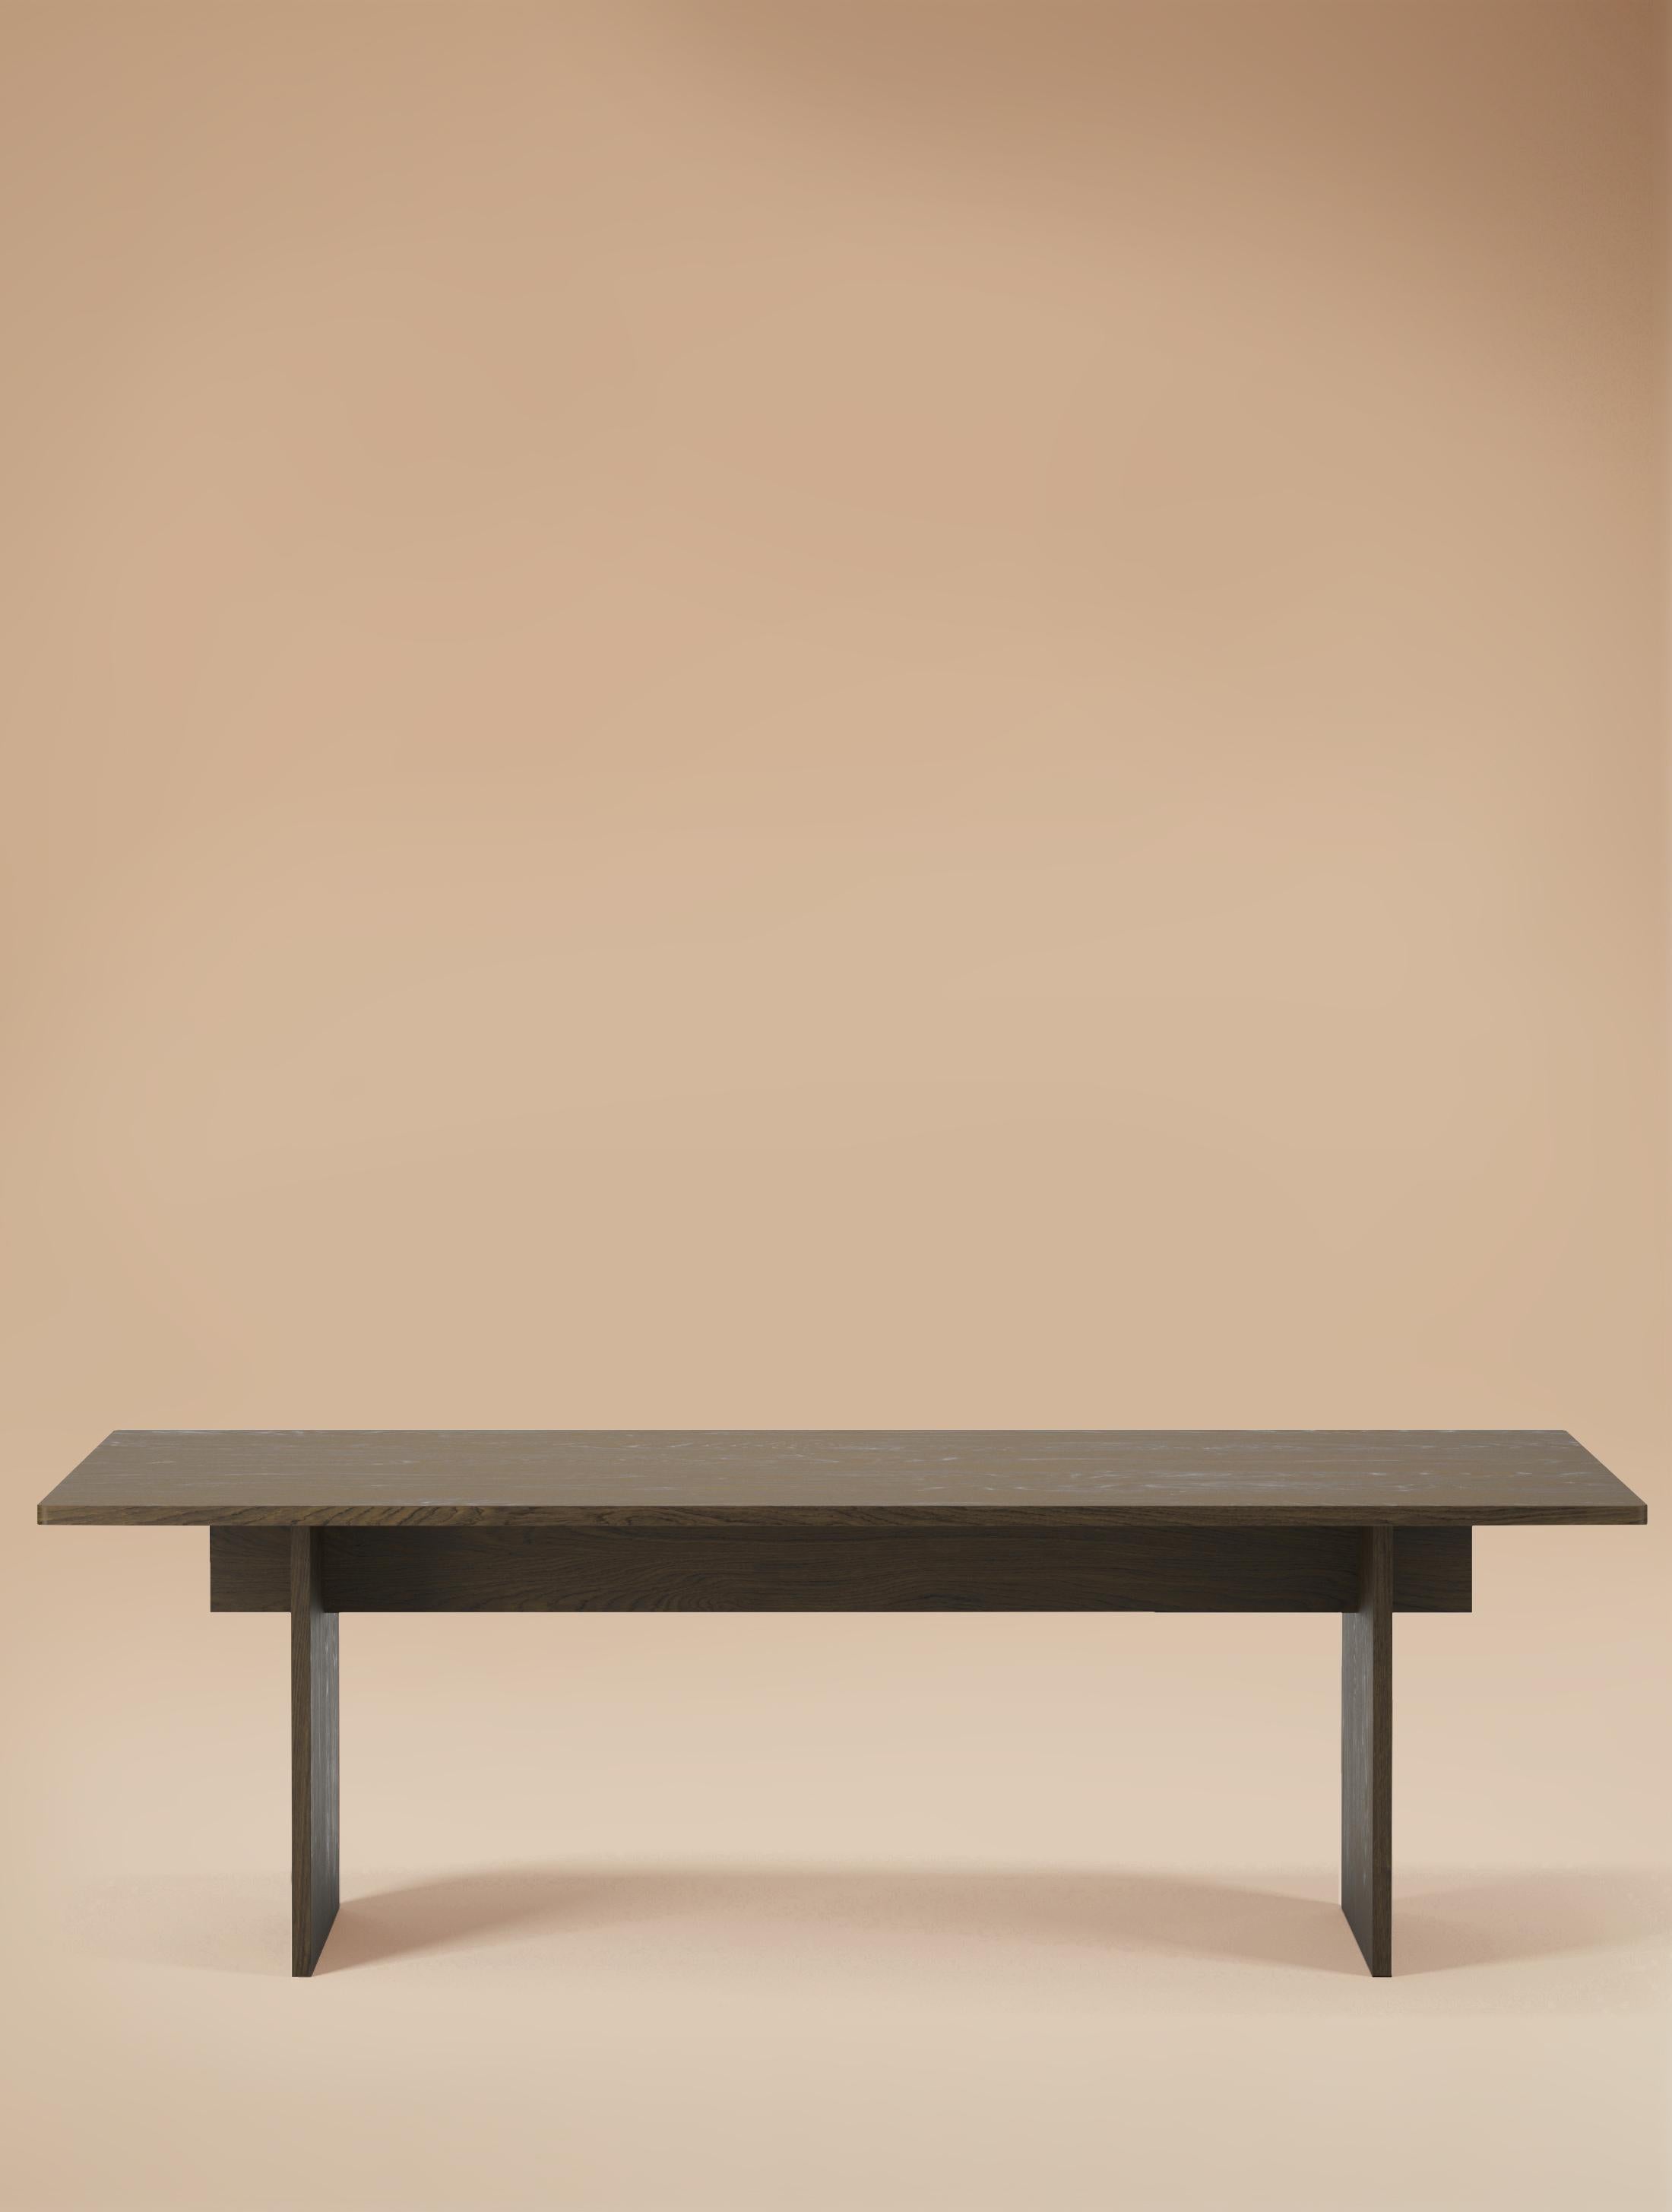 8 Seater  Faure Table Handcrafted in Walnut by Kevin Frankental for Lemon  13